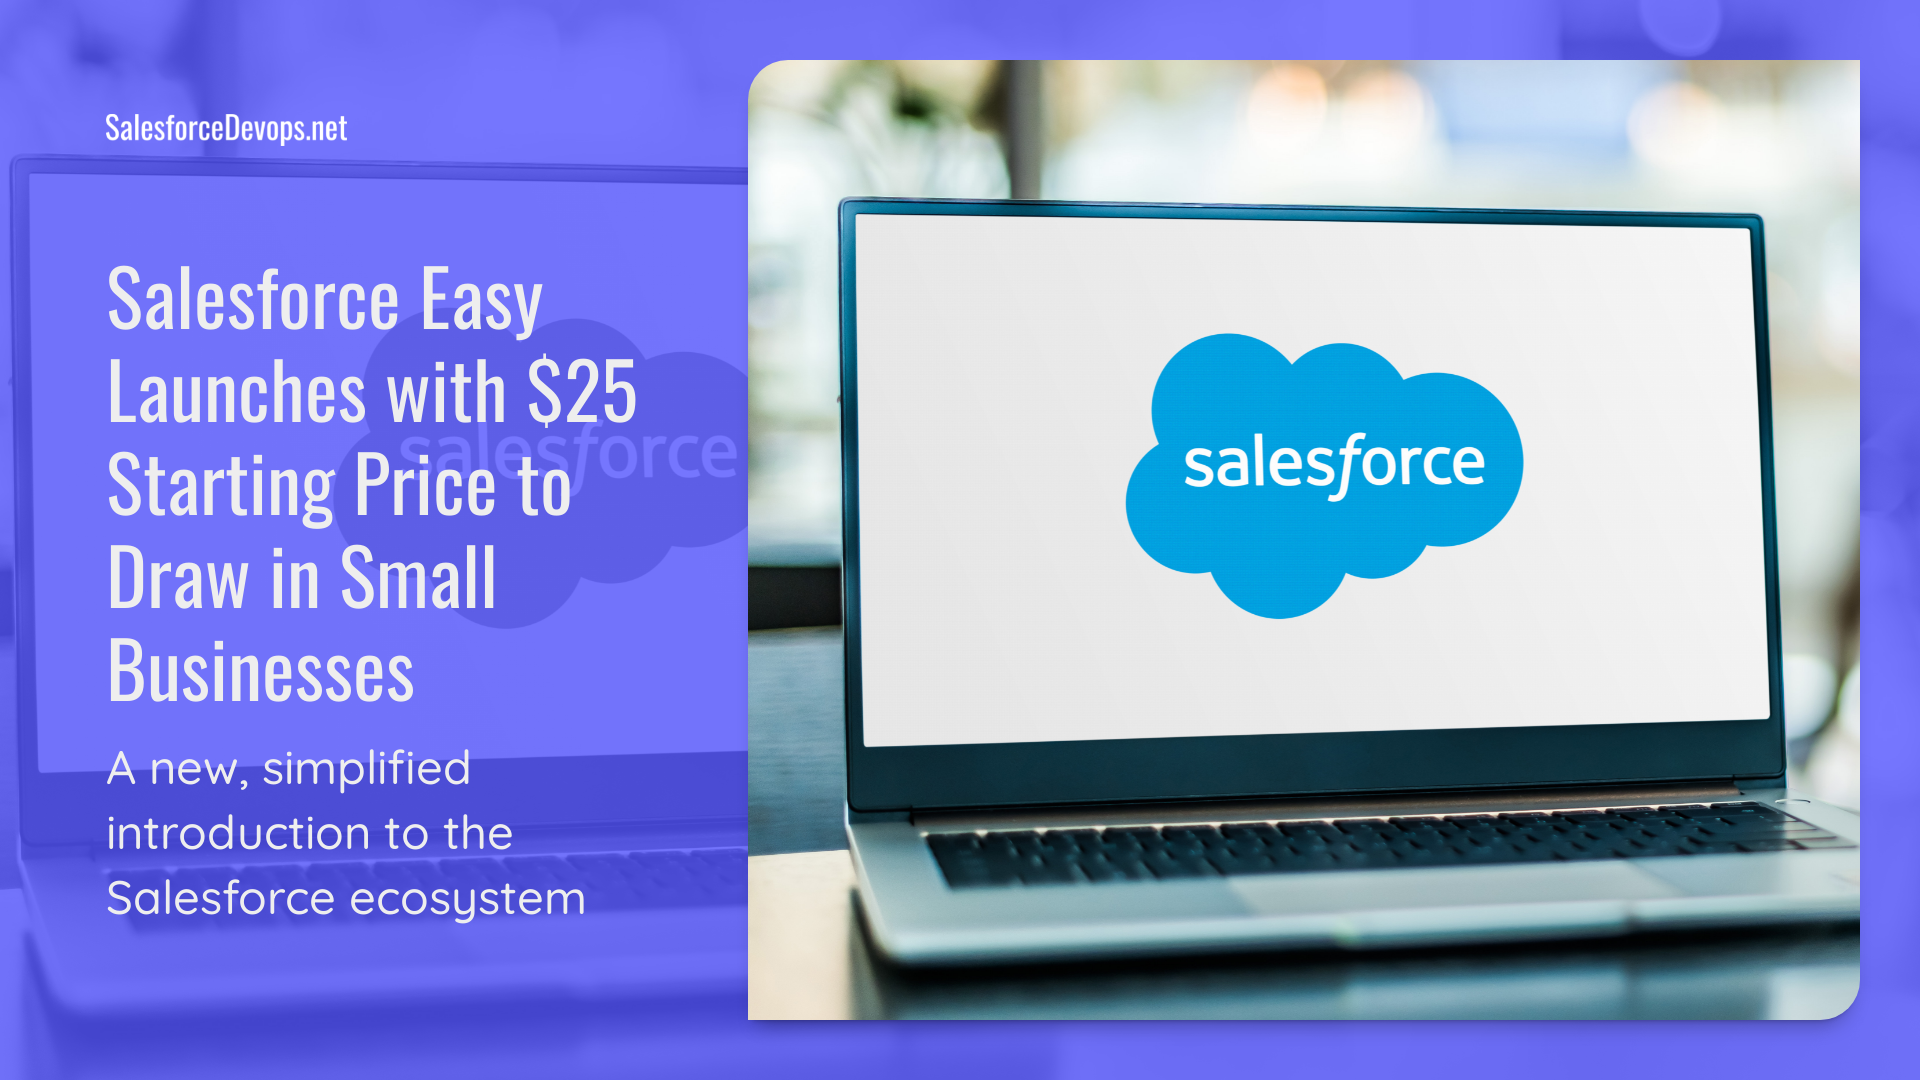 Salesforce Easy Launches at $25 price point